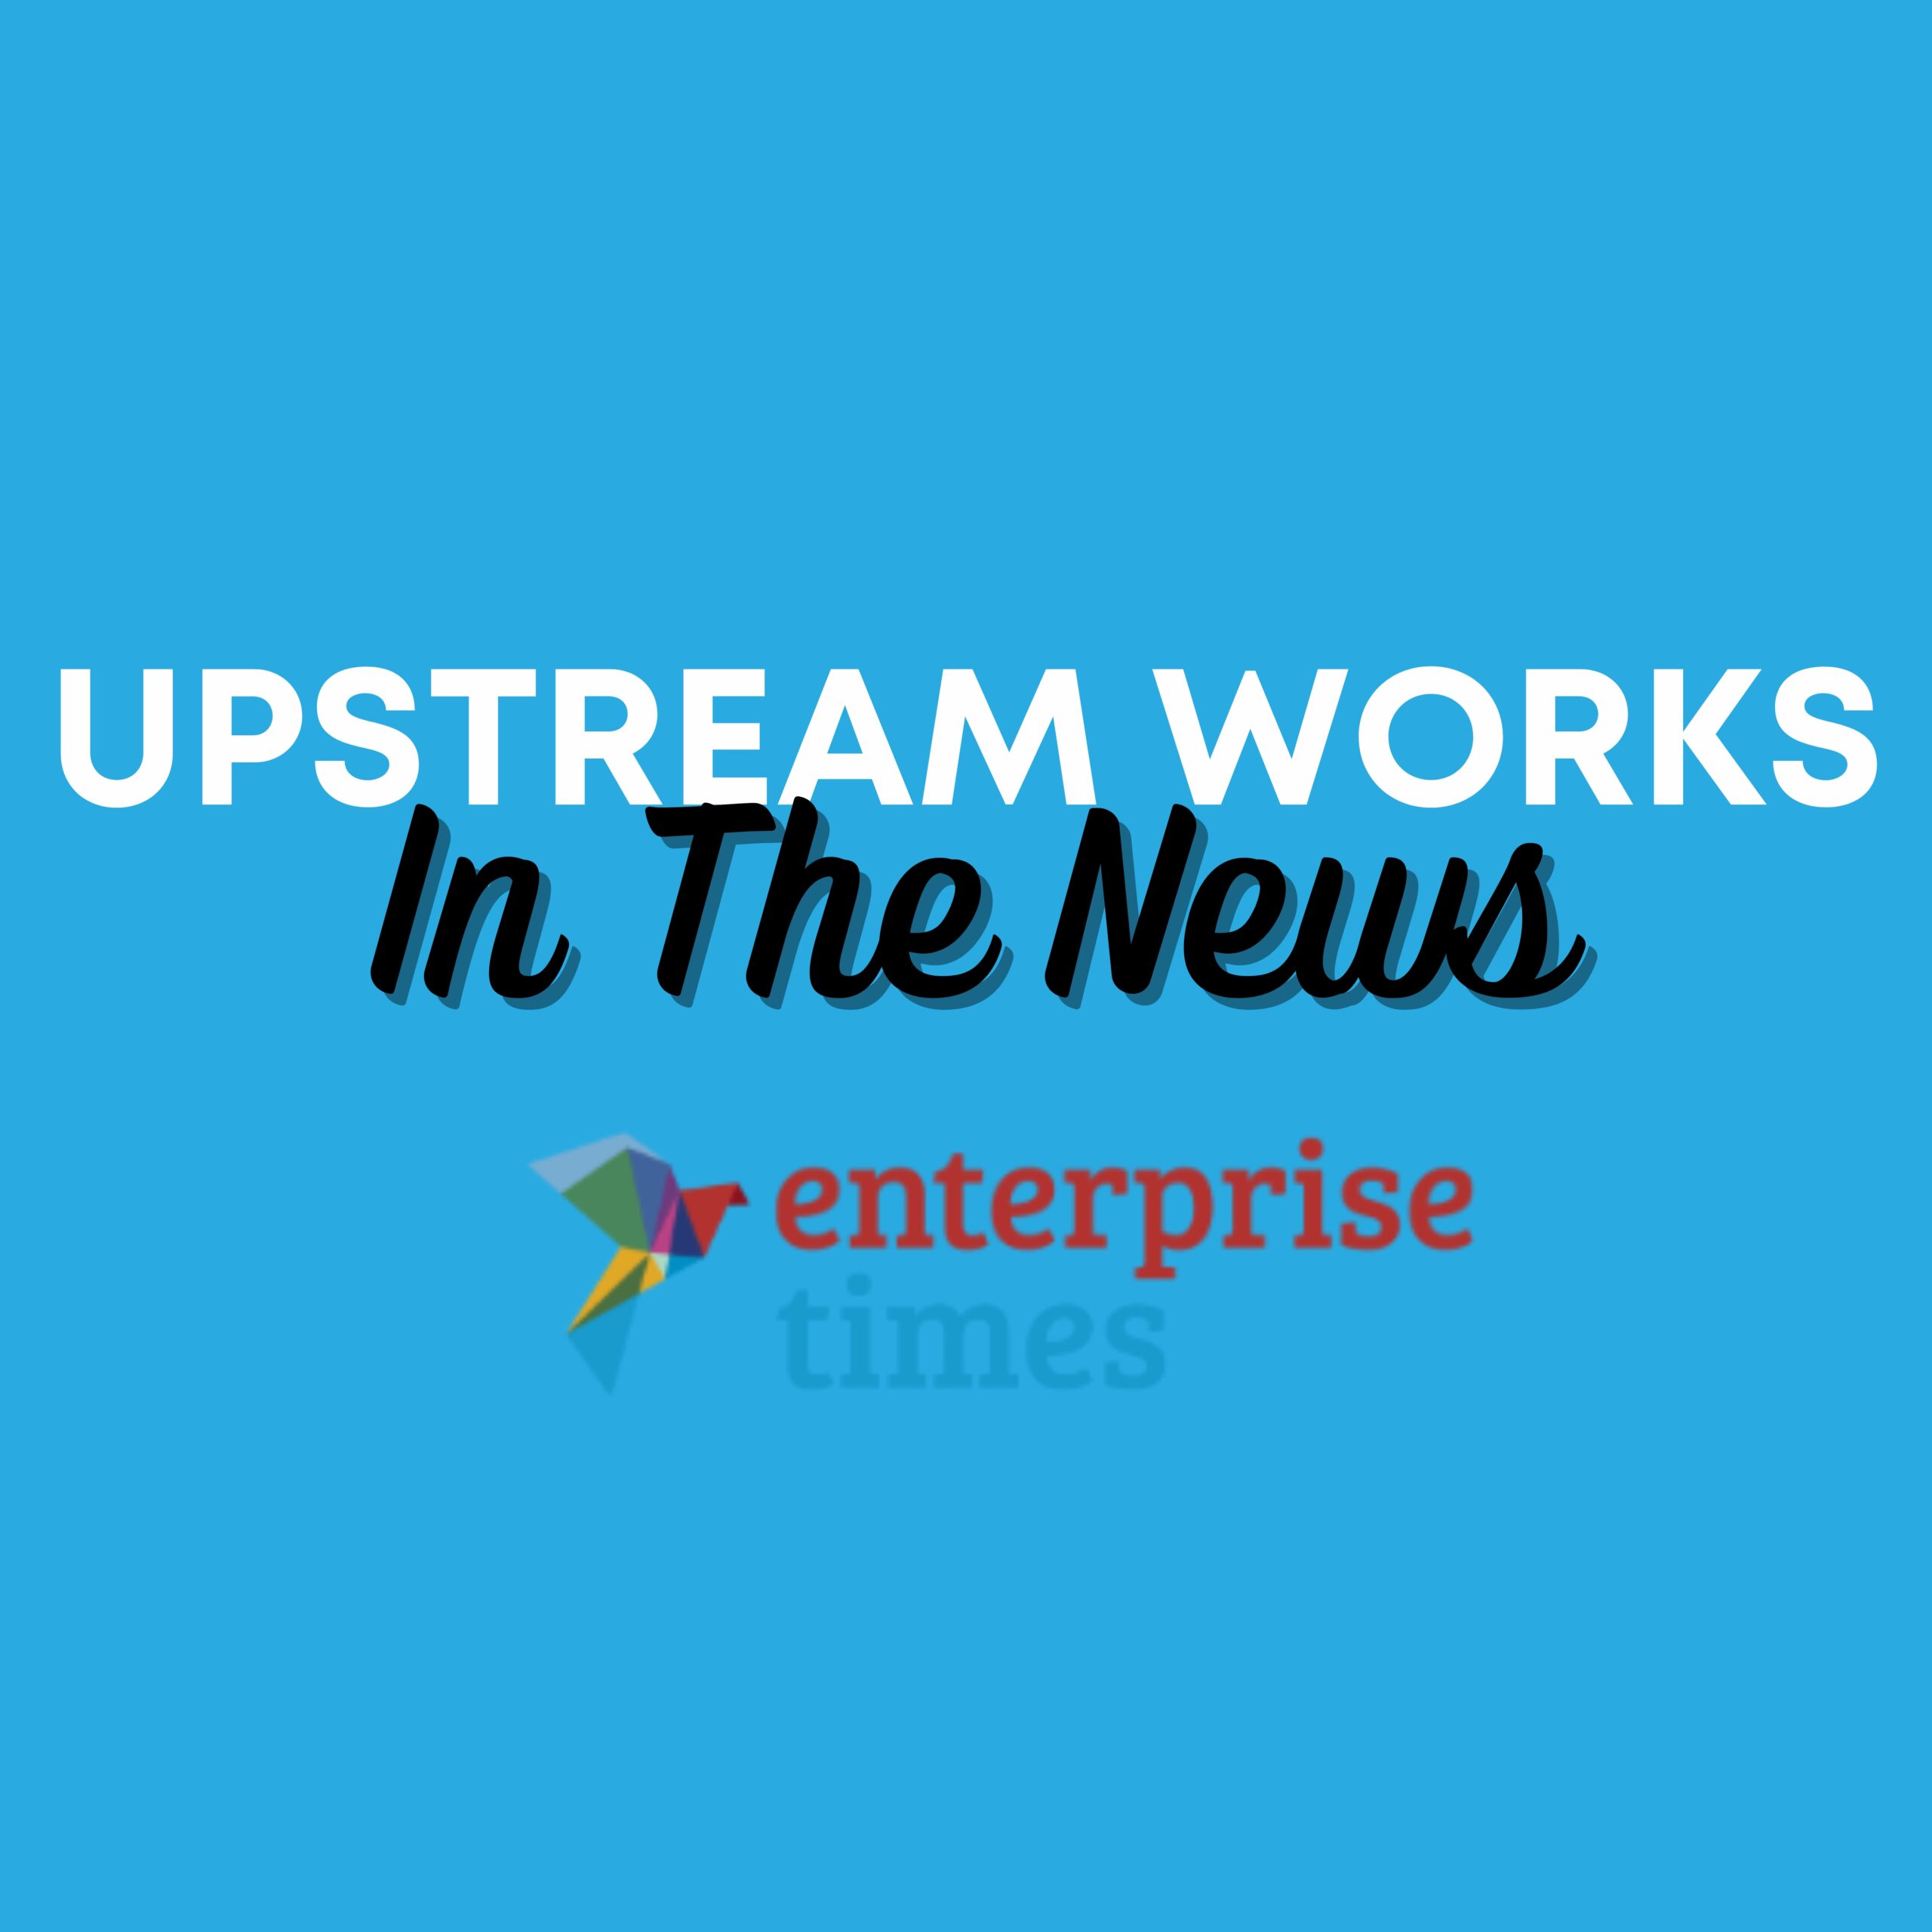 UpstreamWorks Featured in Enterprise Times UK